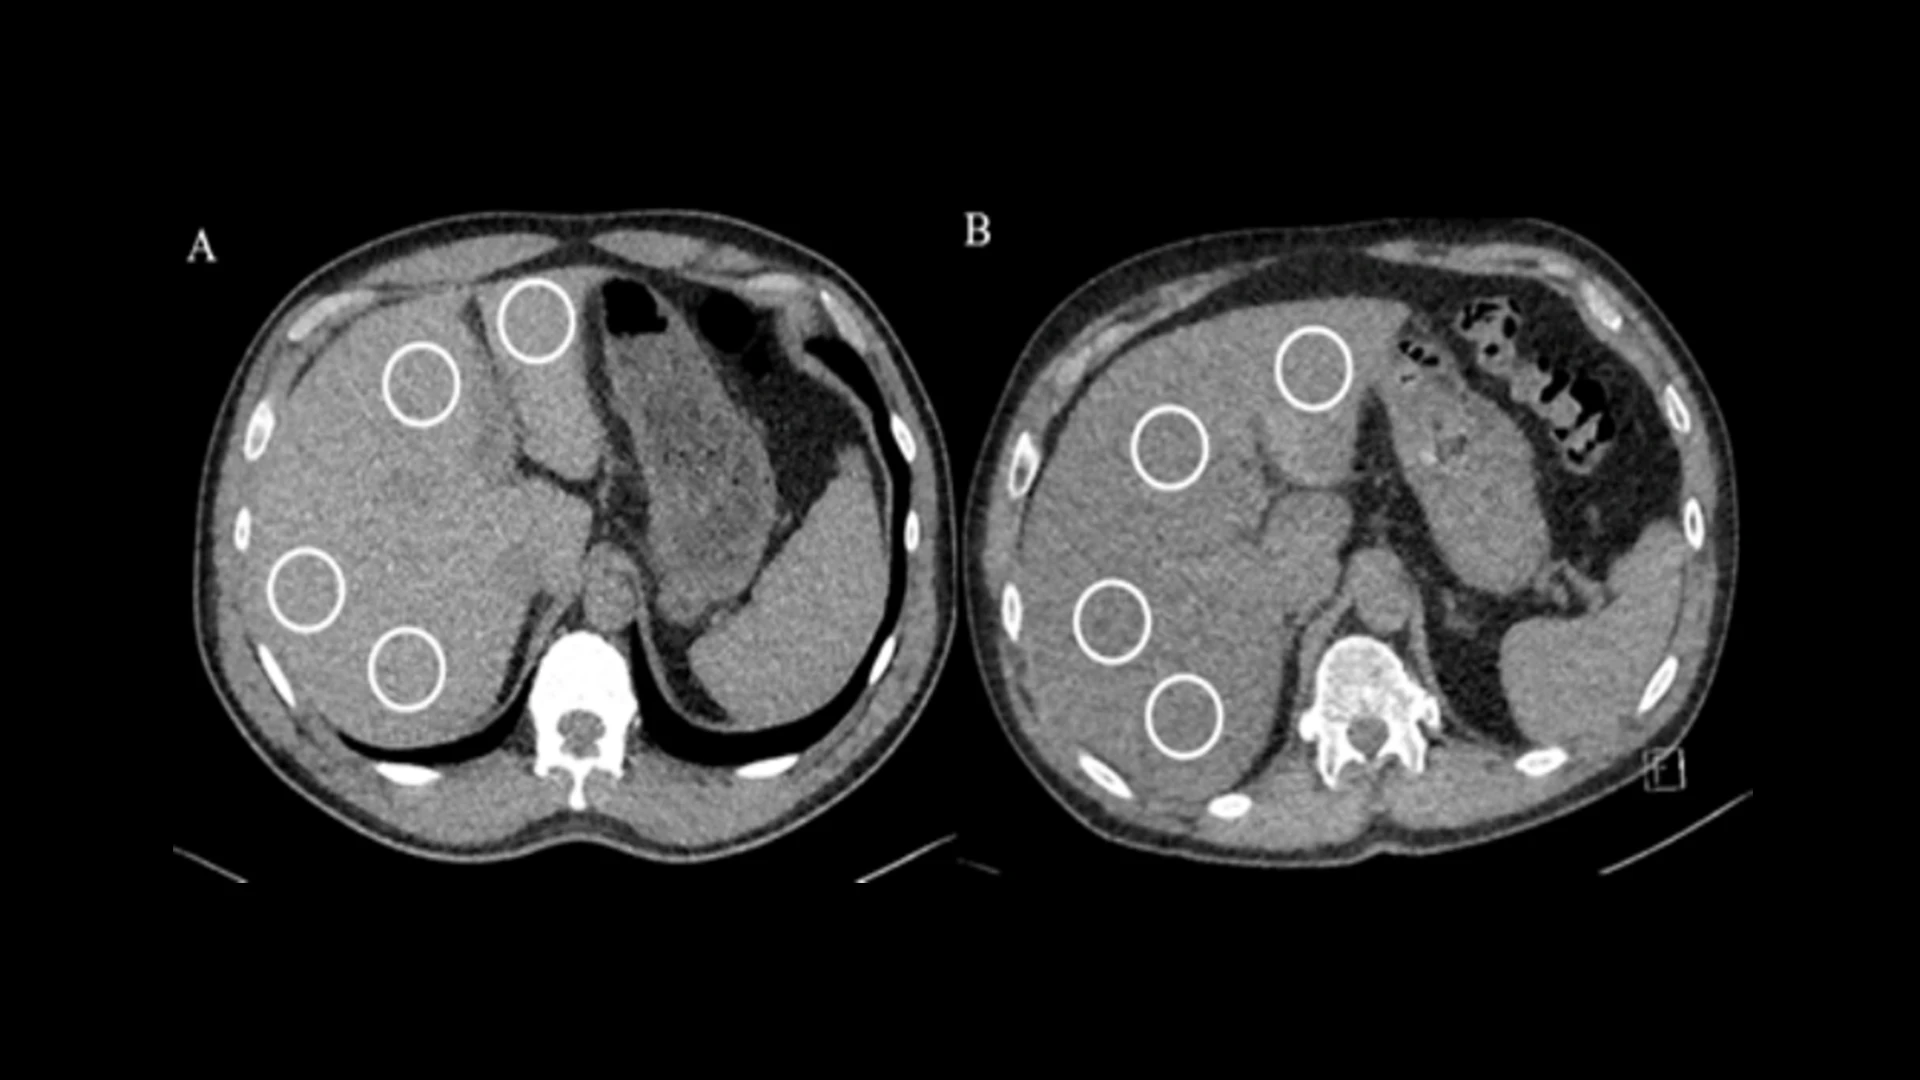 Liver density measurements on non-contrast chest CT in WTC participants. Averaged normal liver attenuation (59.5 HU) was noted in a 56-year-old male (A) and averaged lower liver attenuation (25 HU) was noted in a 57-year-old male (B), consistent with hepatic steatosis. Region of interest (white circles) measurements were placed in the right posterior, right anterior, left medial, and left lateral segments of the liver to determine liver attenuation, avoiding lesions and vessels.